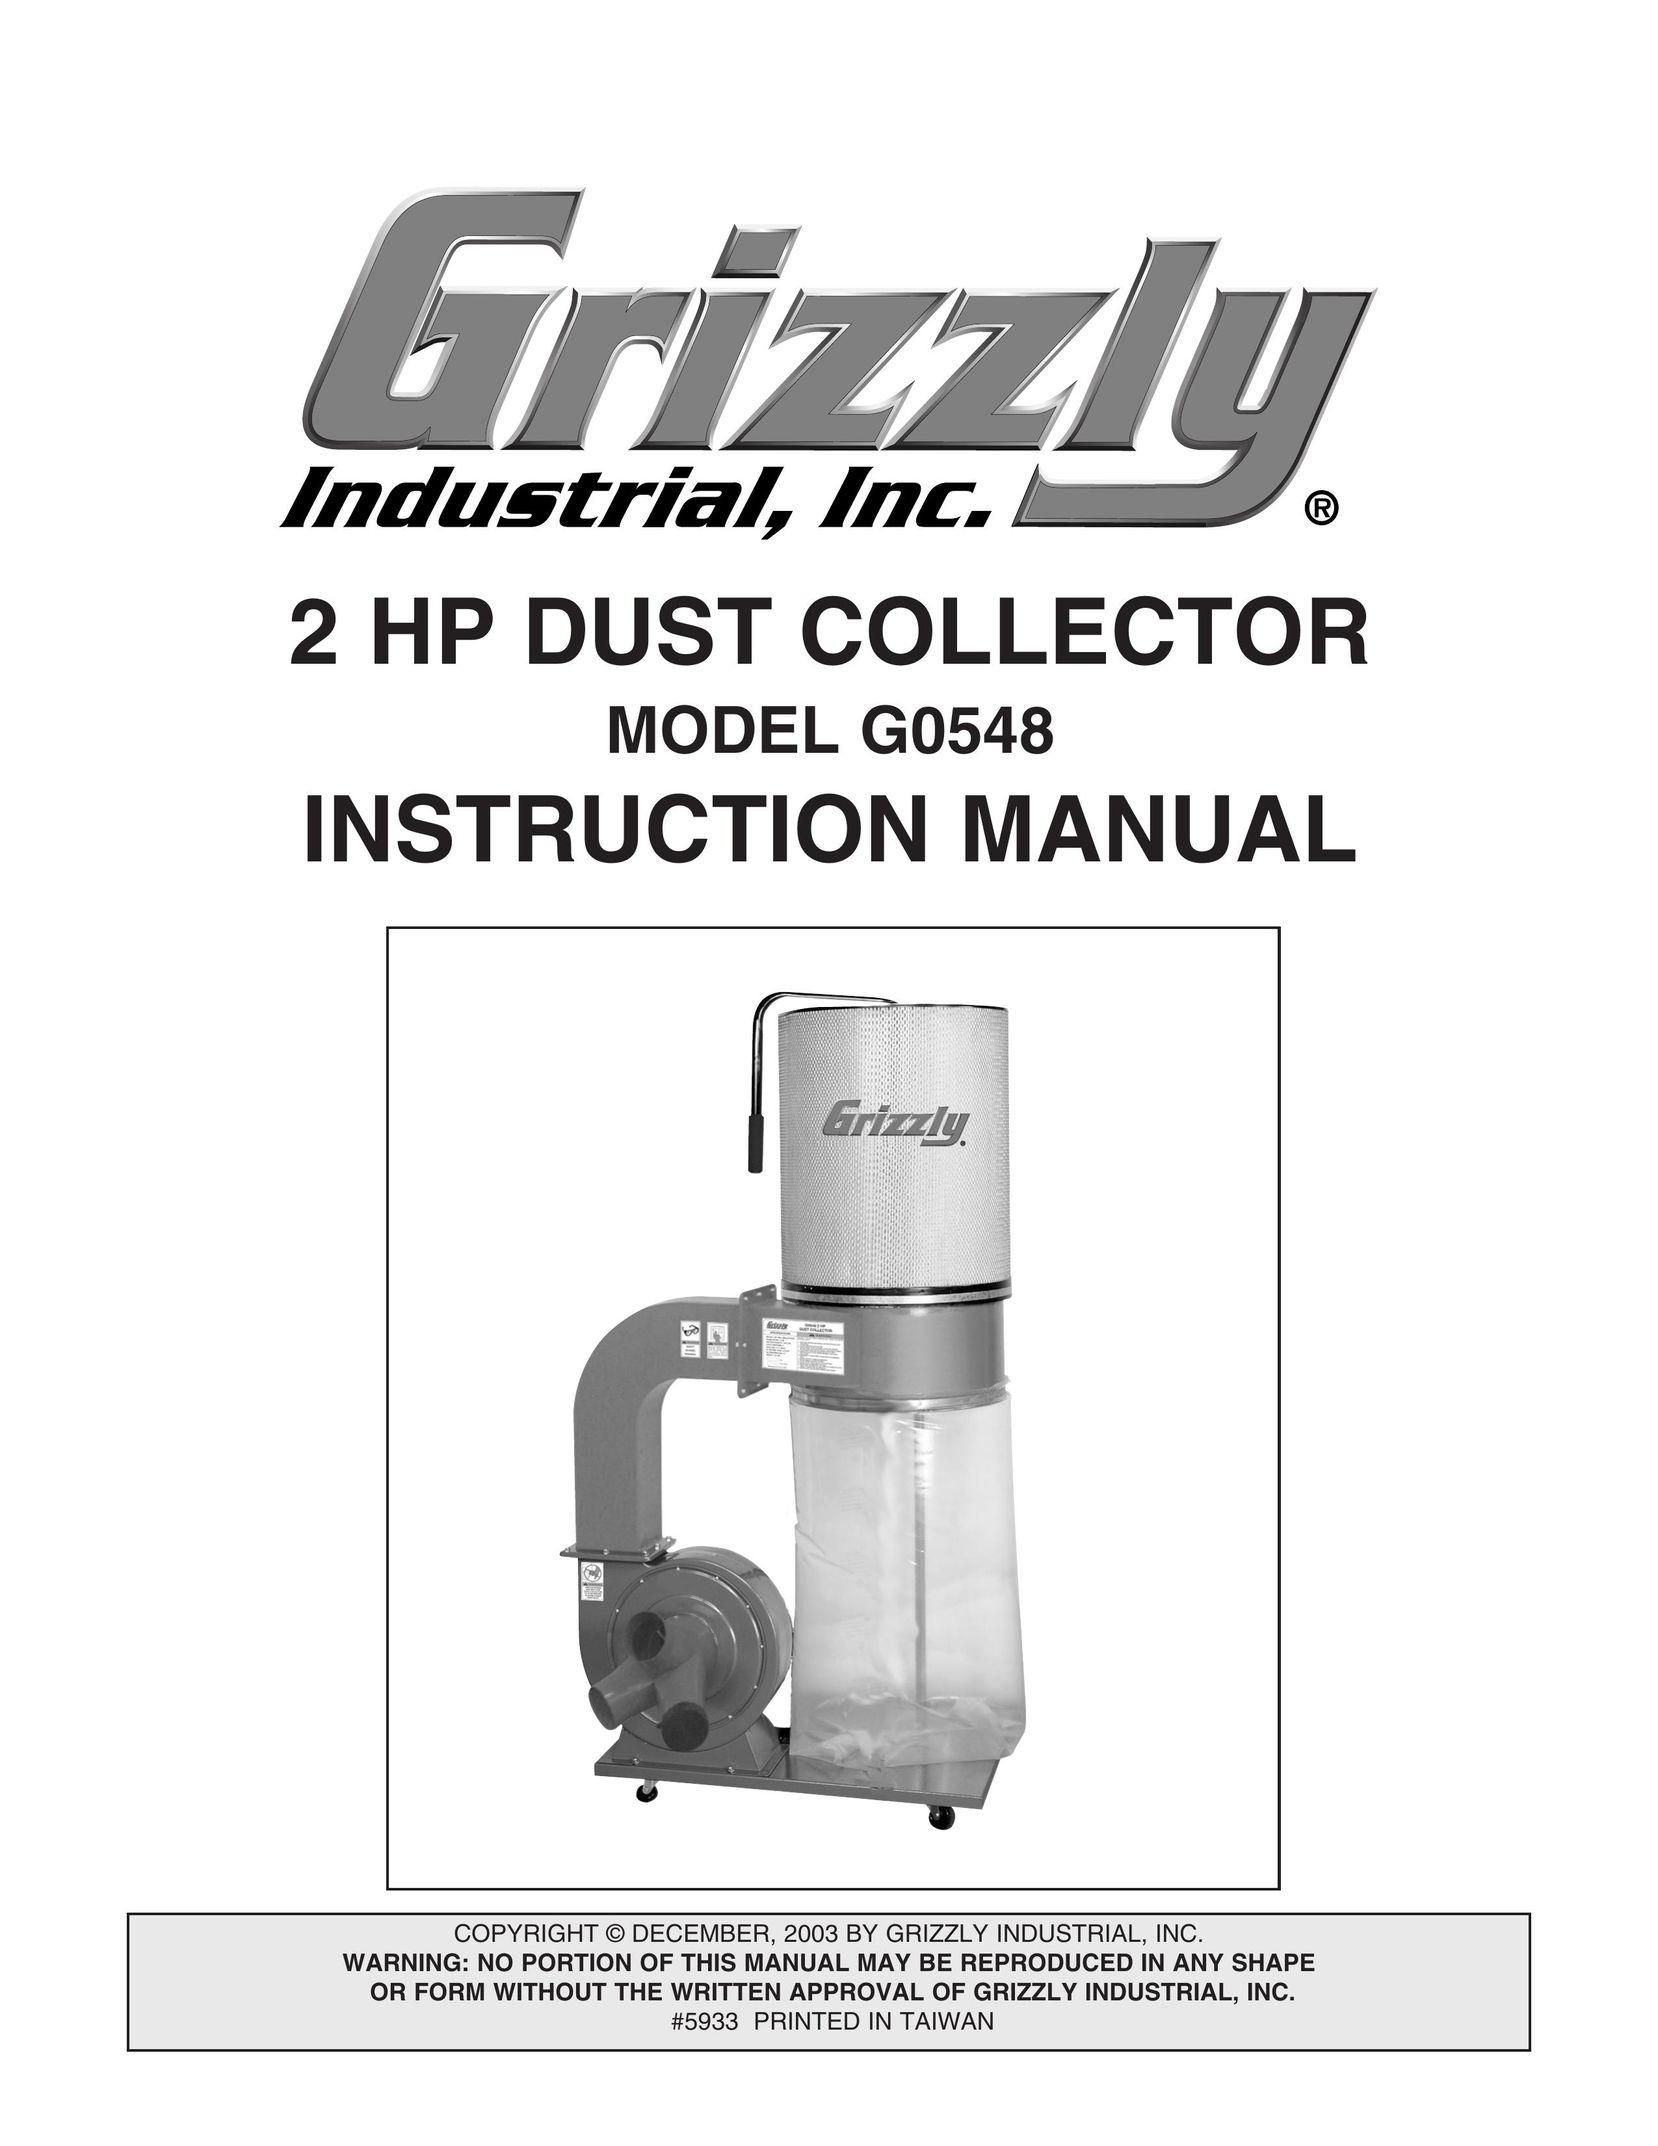 Grizzly G0548 Dust Collector User Manual